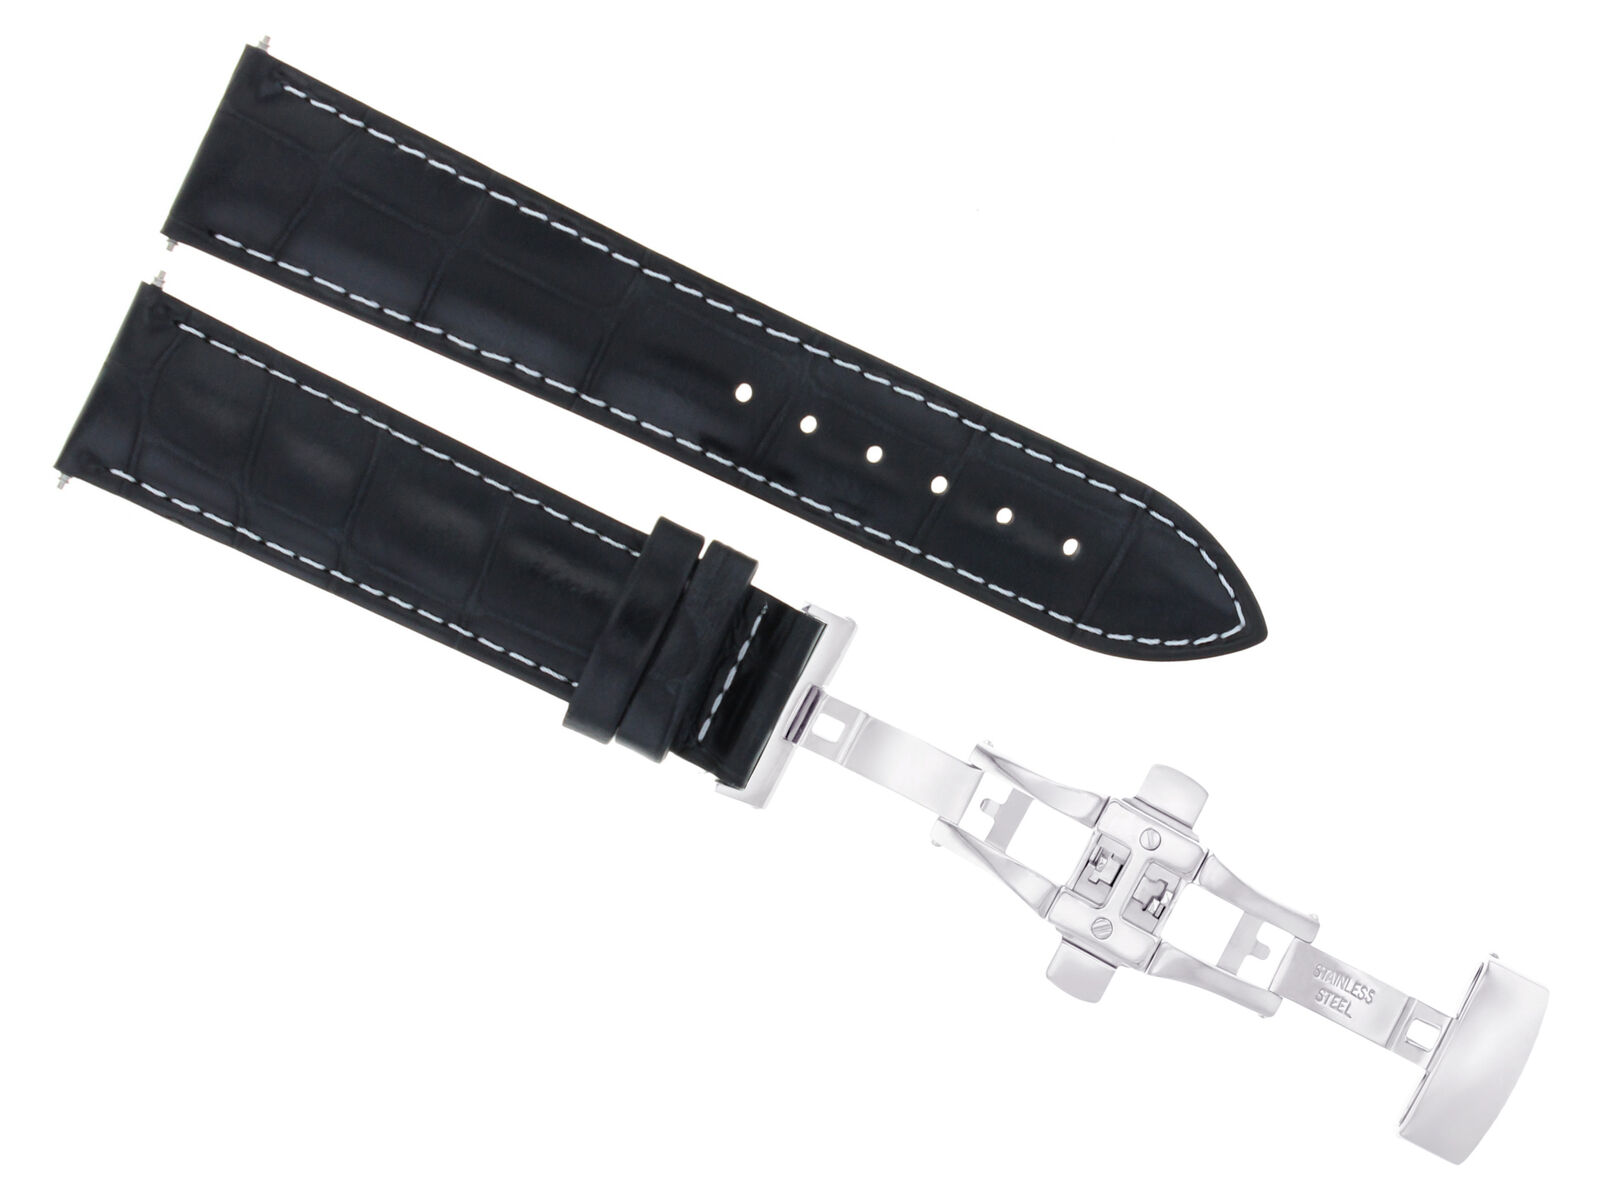 18MM BLACK WS LEATHER WATCH BAND STRAP DEPLOY CLASP FOR VACHERON CONSTANTIN 3B